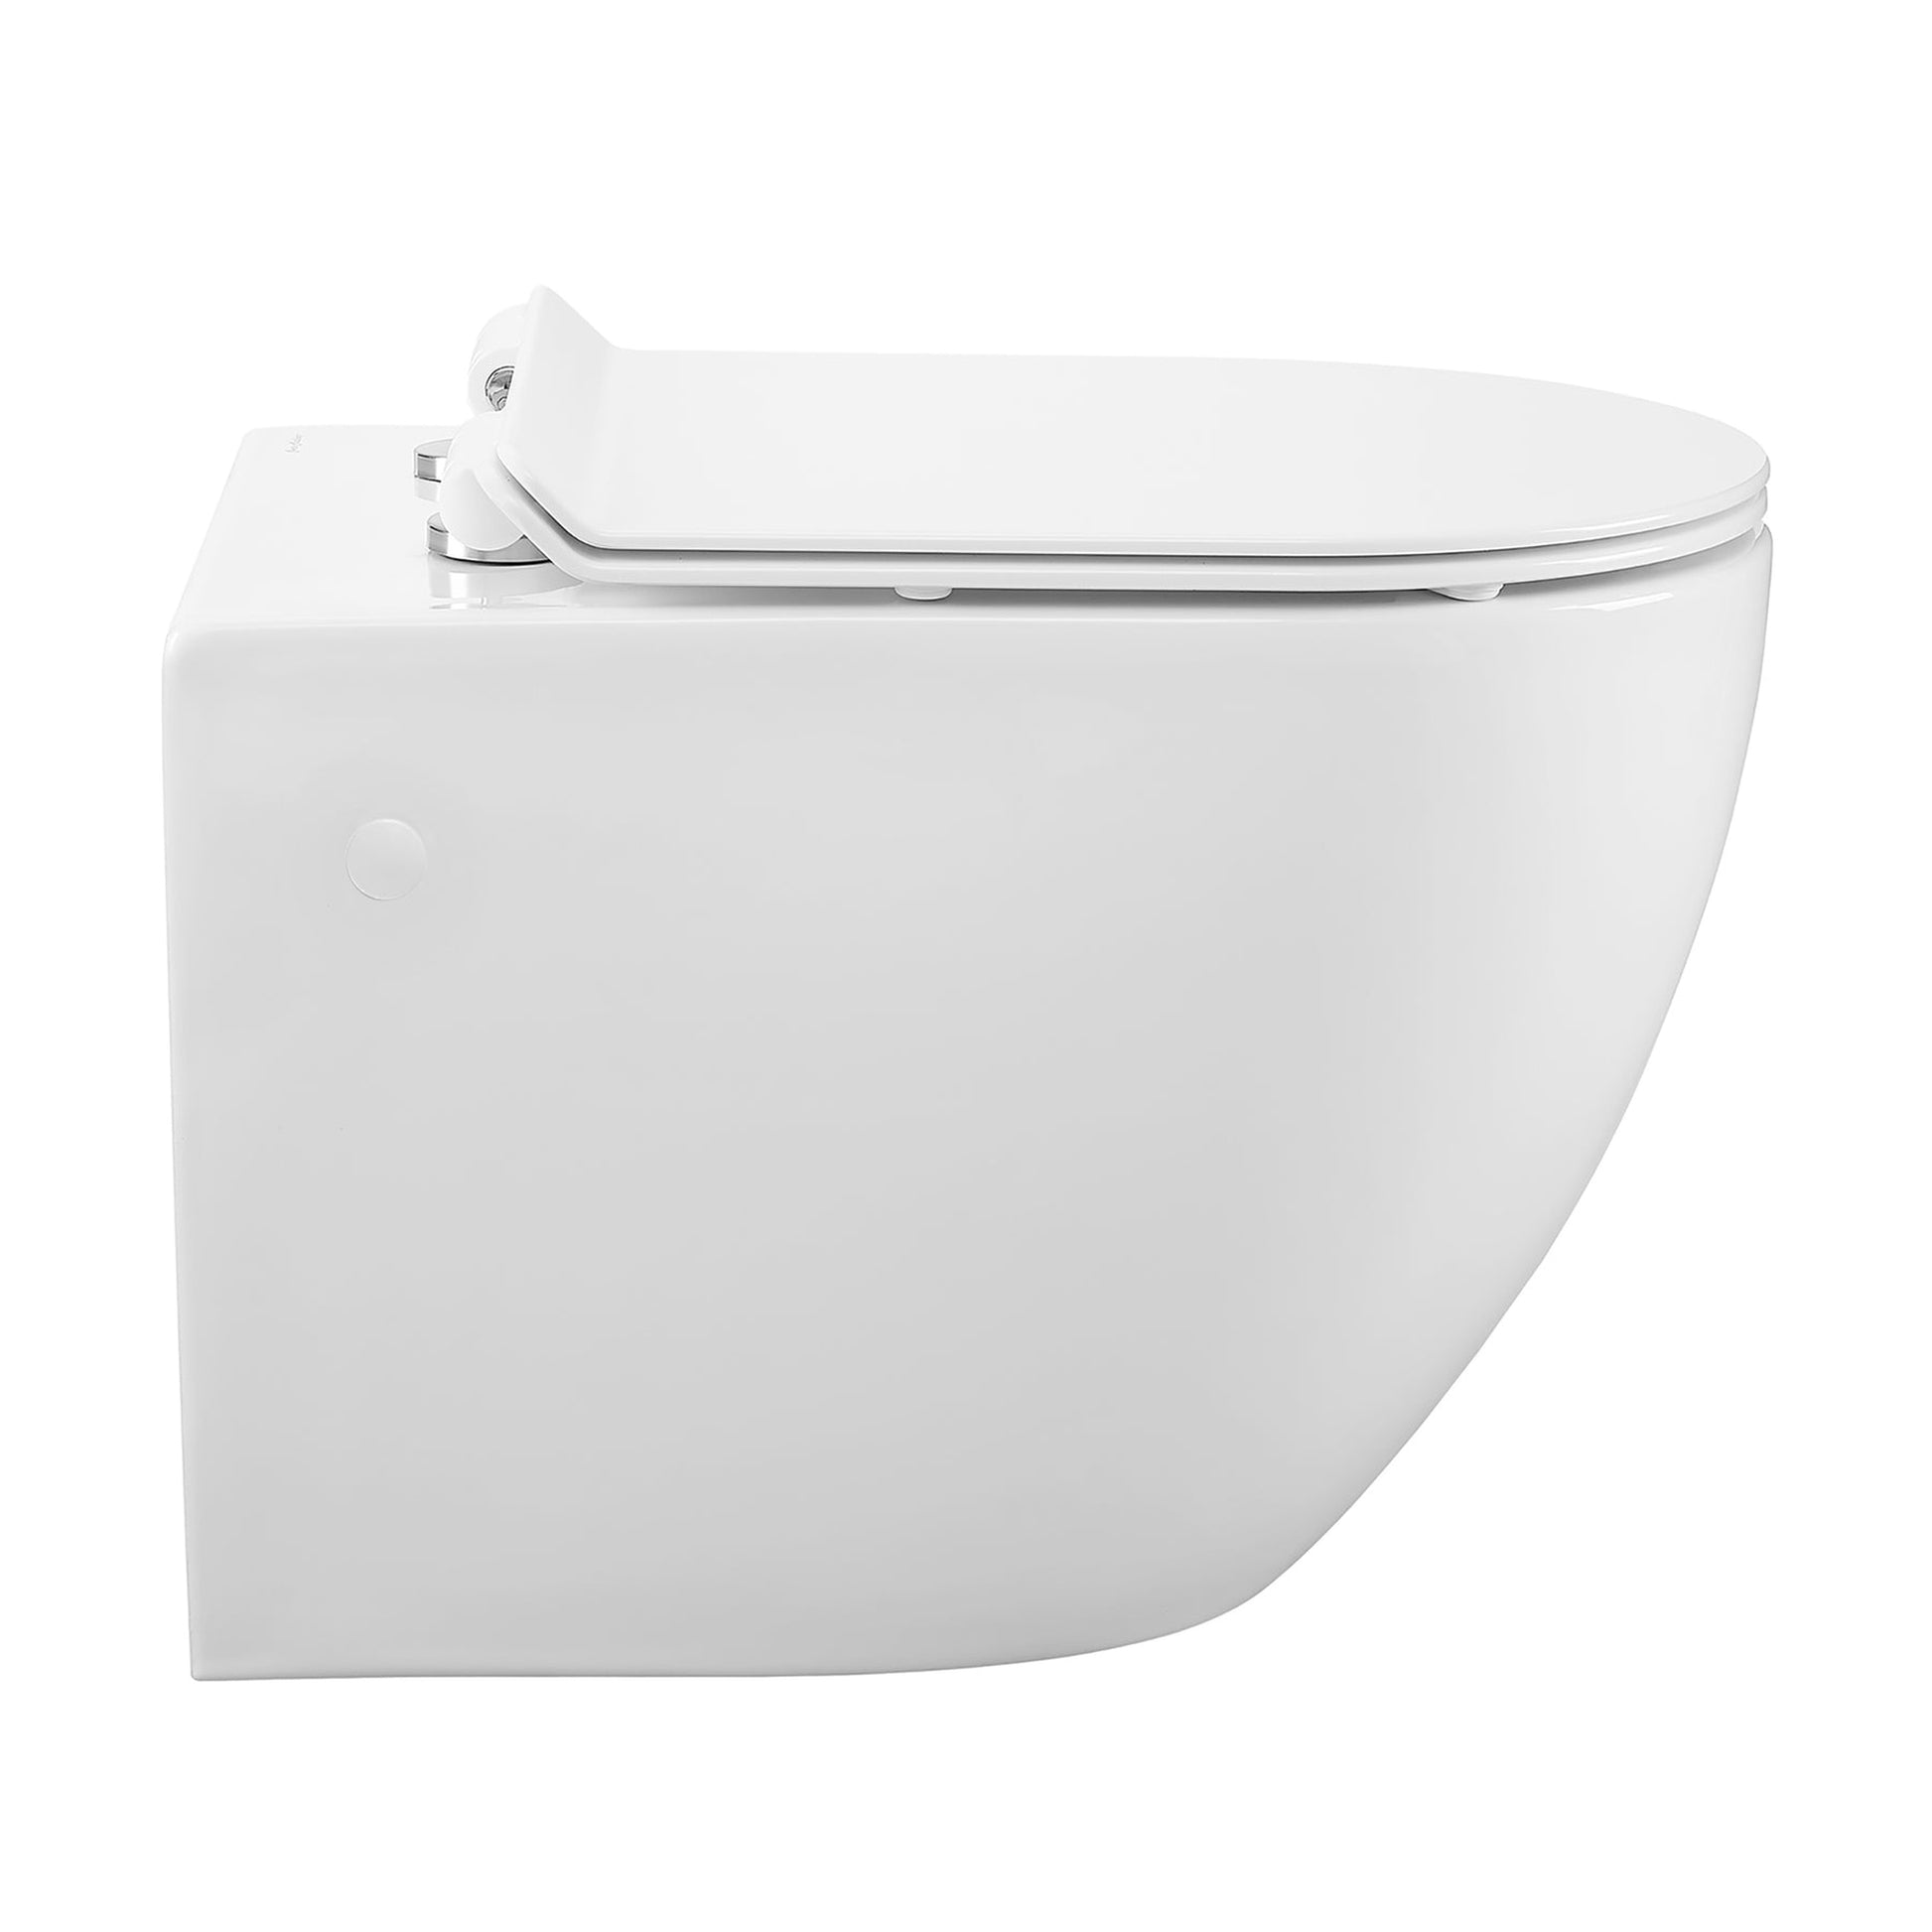 Swiss Madison St. Tropez 14" x 14" Glossy White Elongated Wall-Hung Toilet Bundle With In-Wall Carrier Tank and 0.8/1.6 GPF Dual-Flush Large Wall Actuator Plate